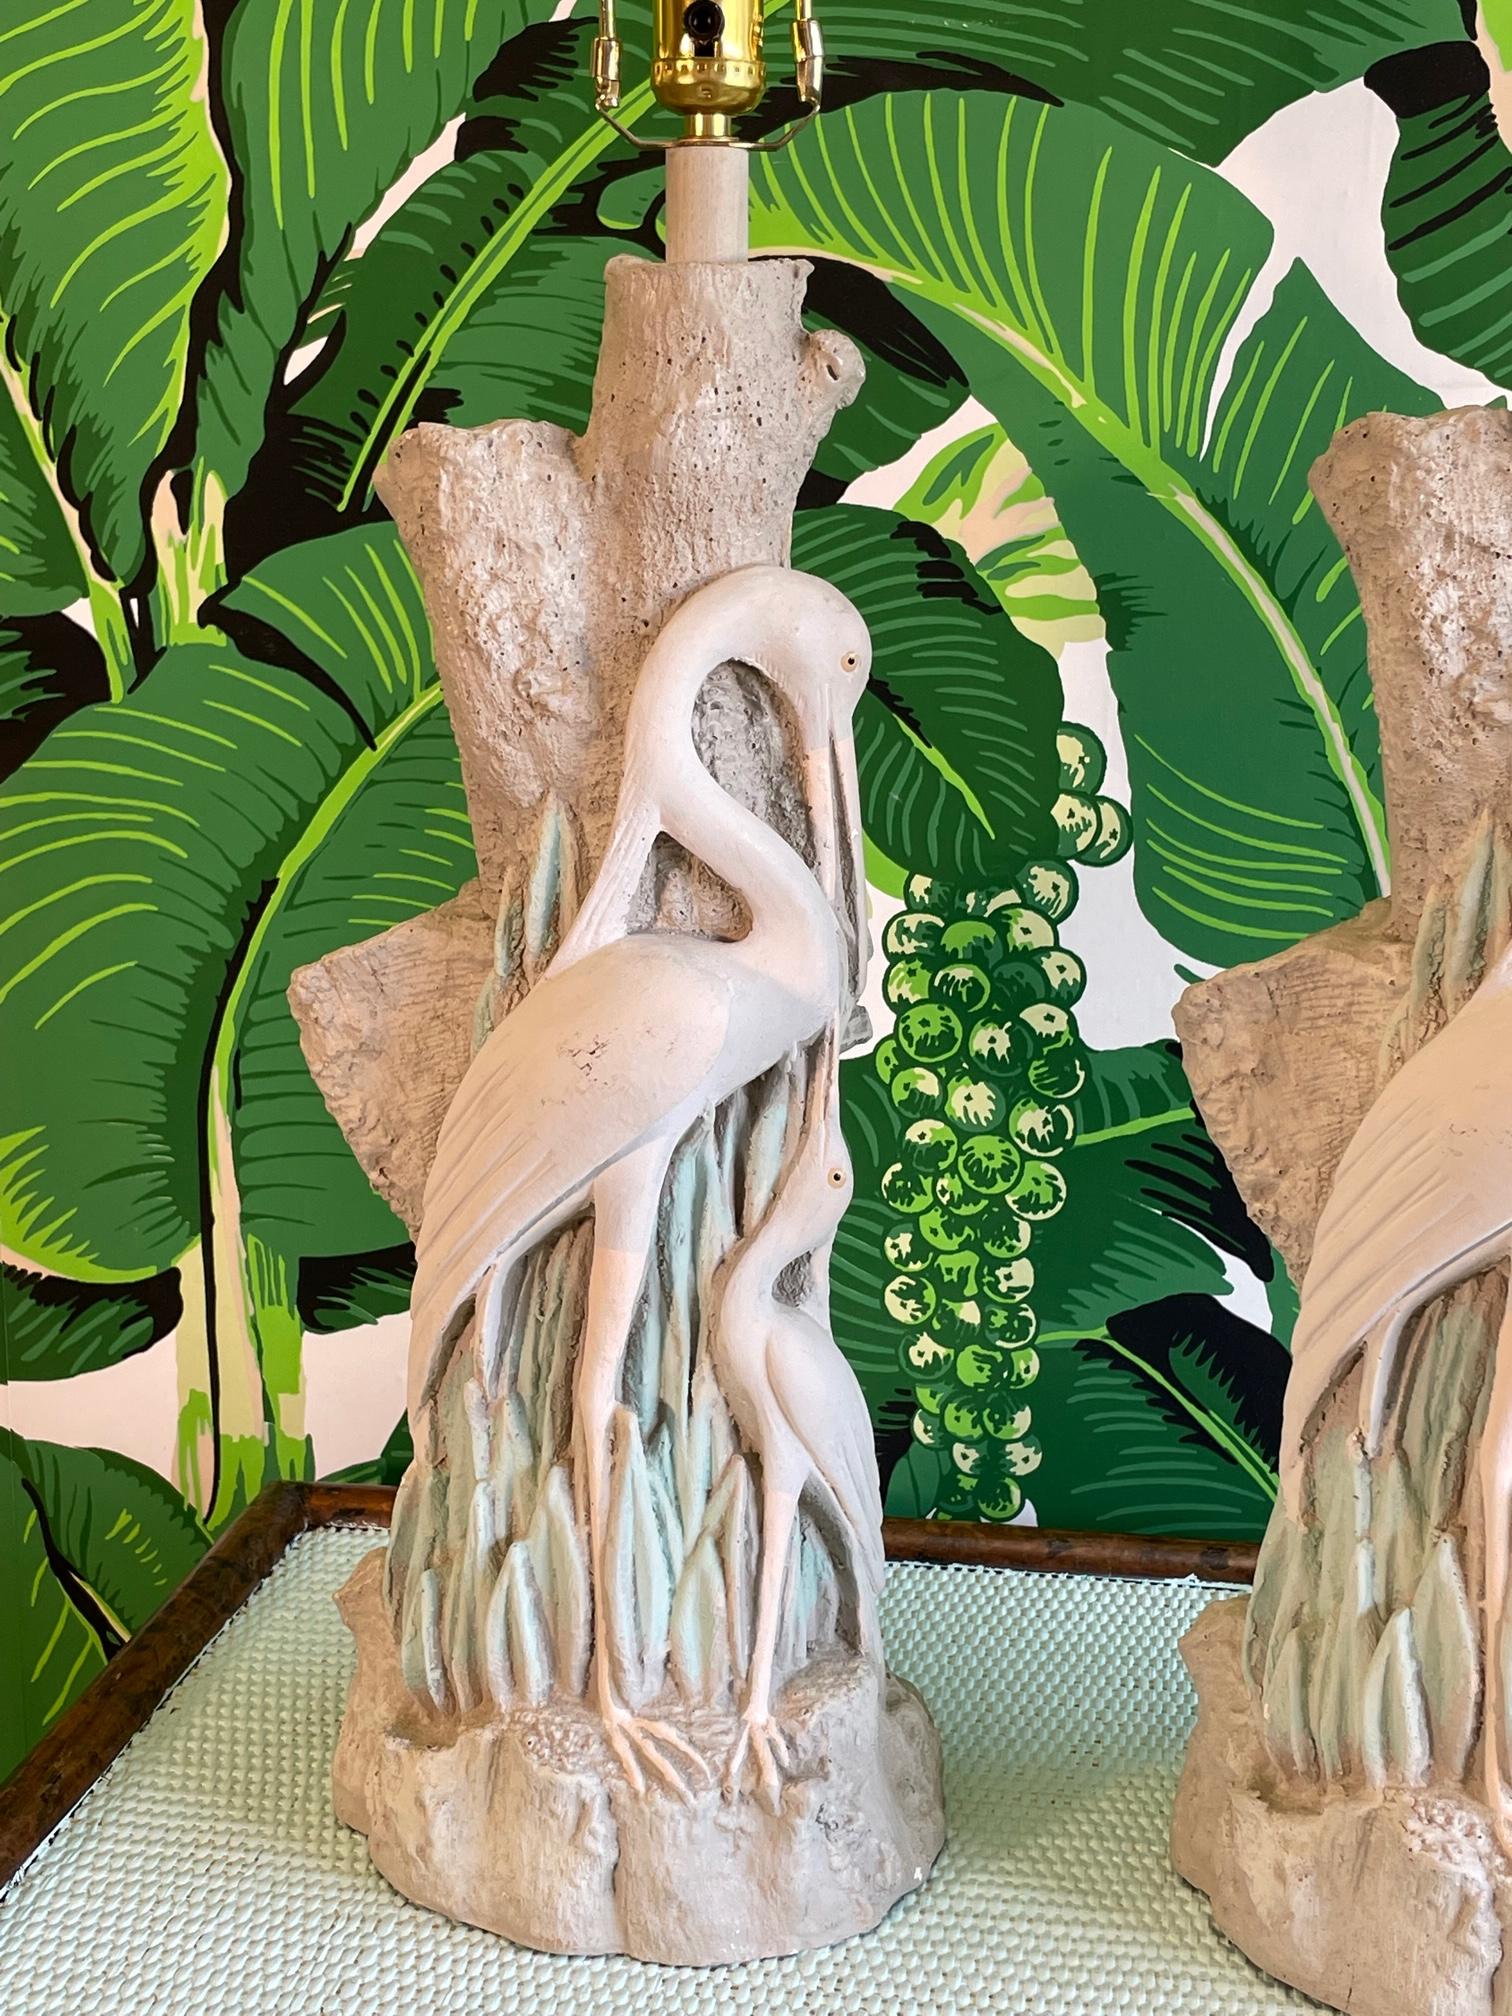 Pair of sculptural table lamps feature a mother and baby egret standing in front of a tree. Good condition with imperfections consistent with age, see photos for condition details. 
For a shipping quote to your exact zip code, please message us.
